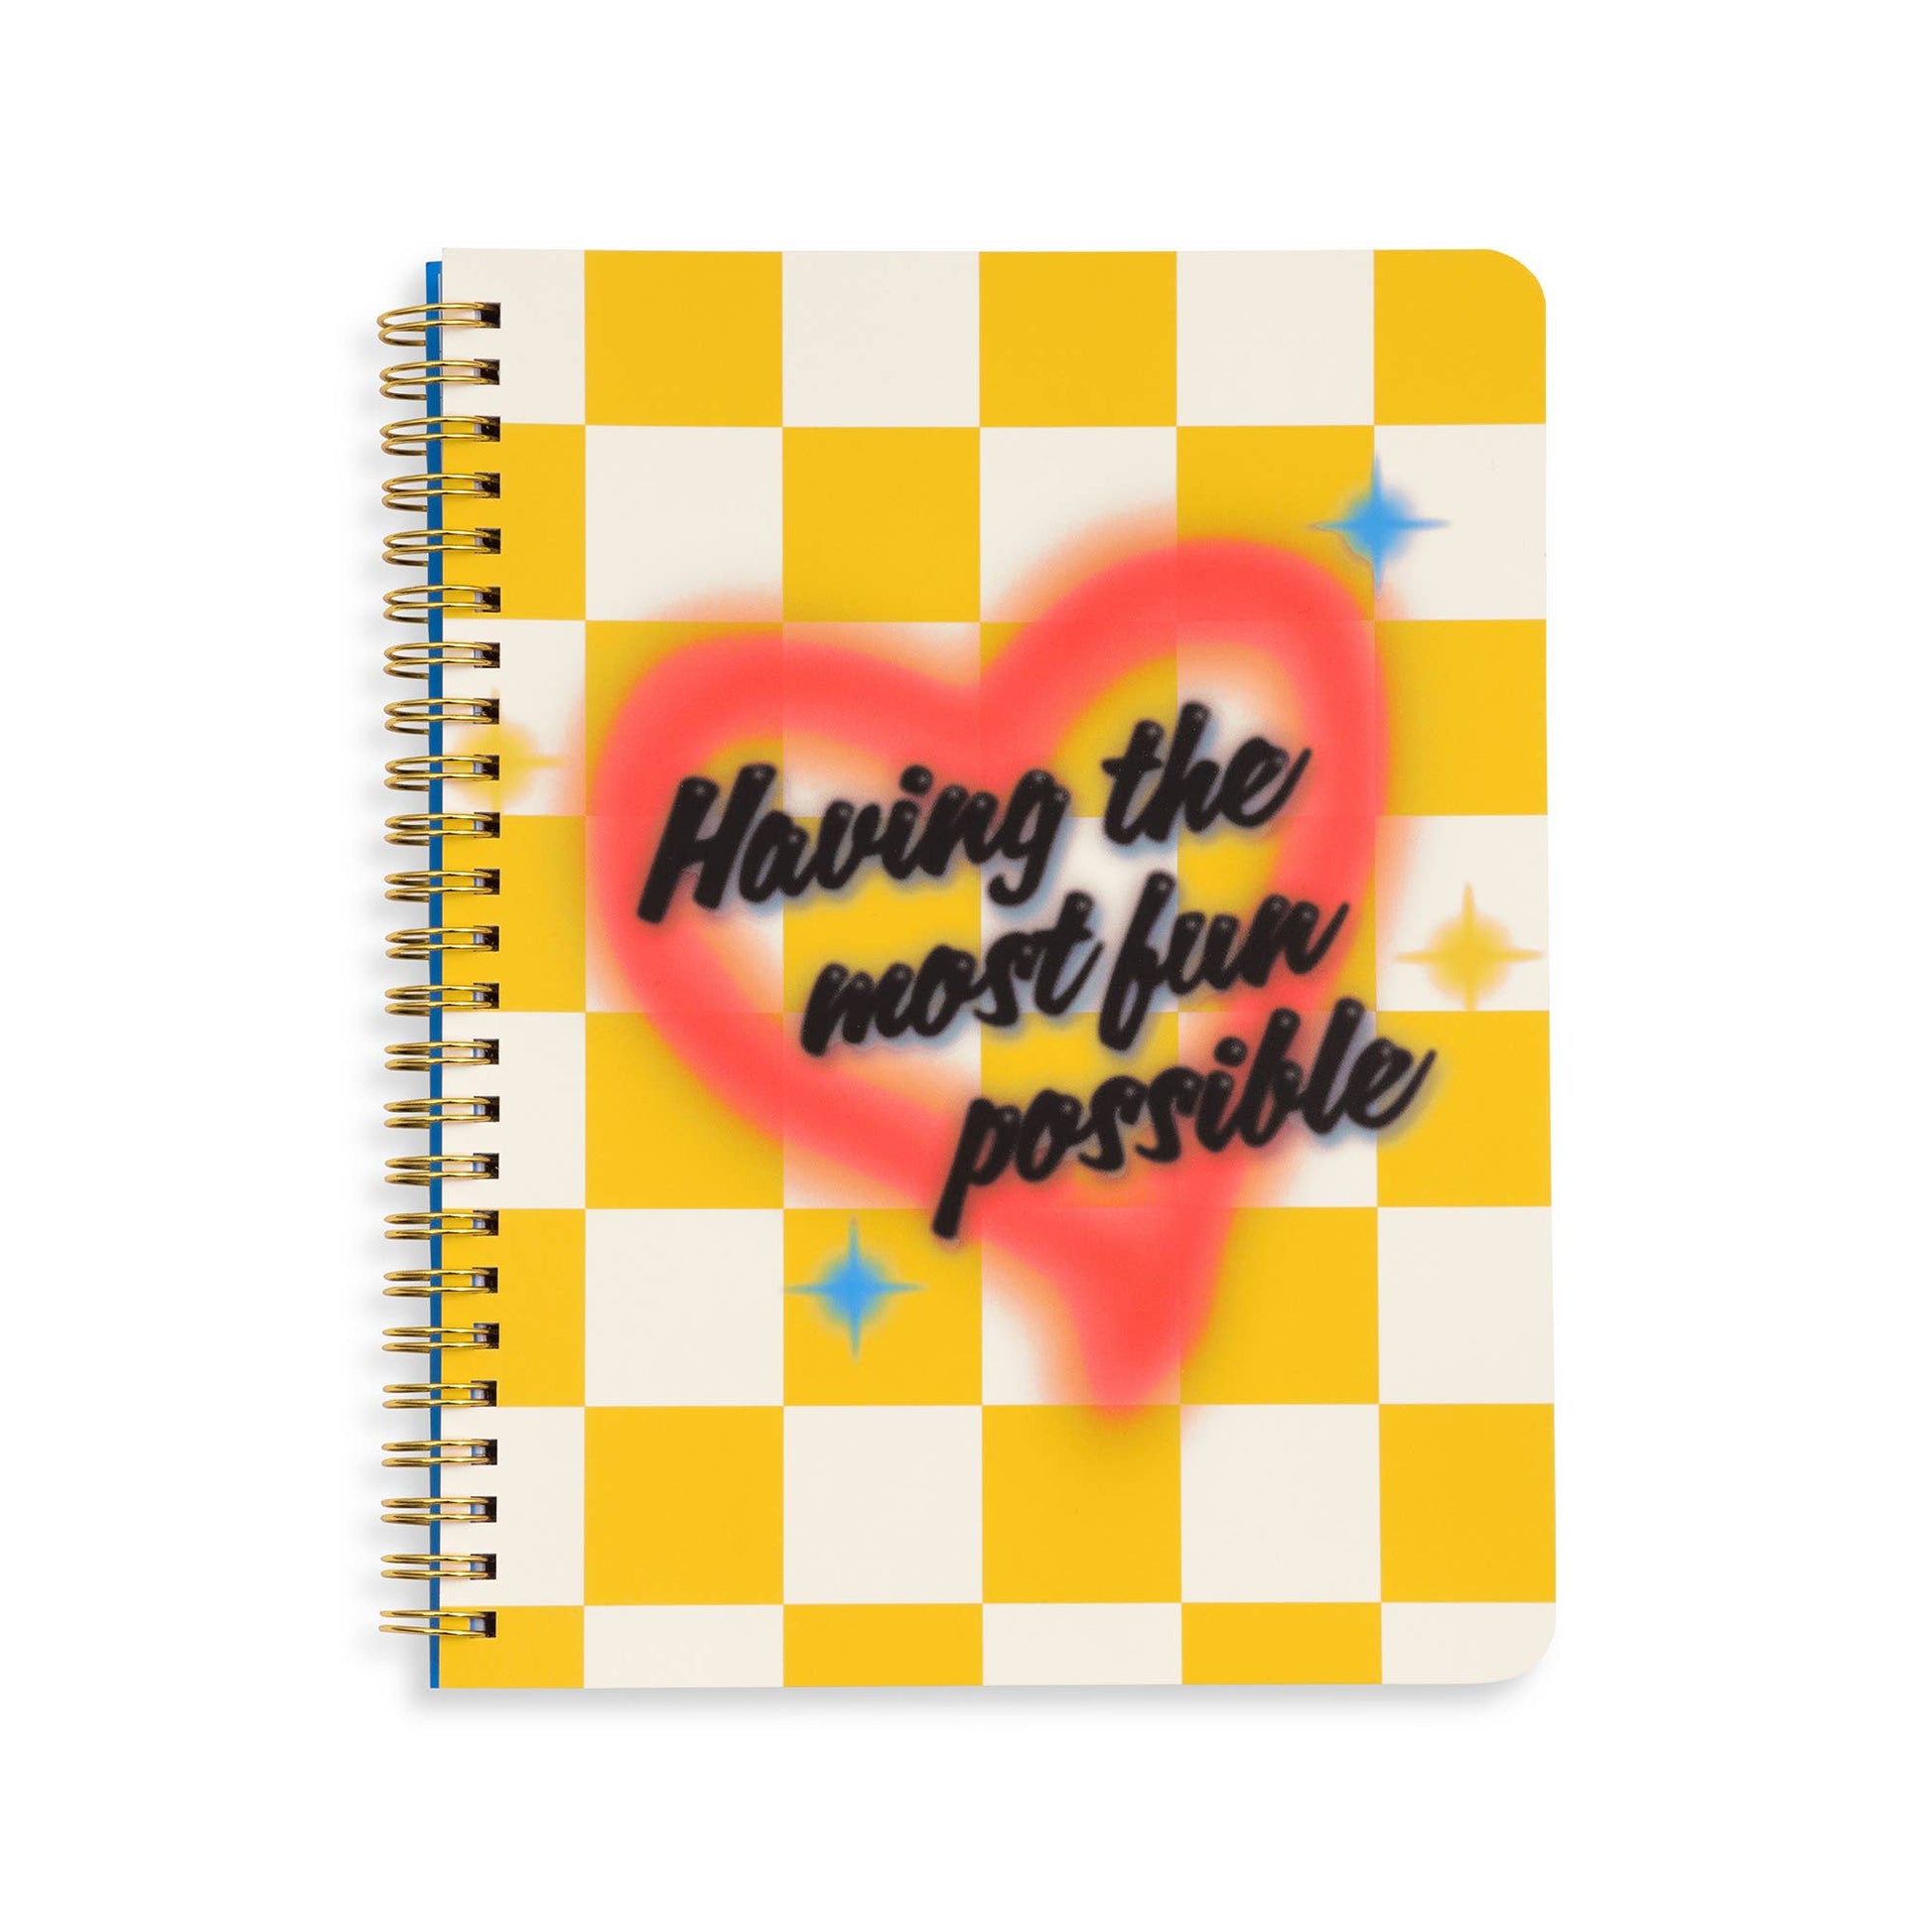 Having The Most Fun Possible Rough Draft Mini Notebook | Small Spiral Journal | 160 Lined Pages